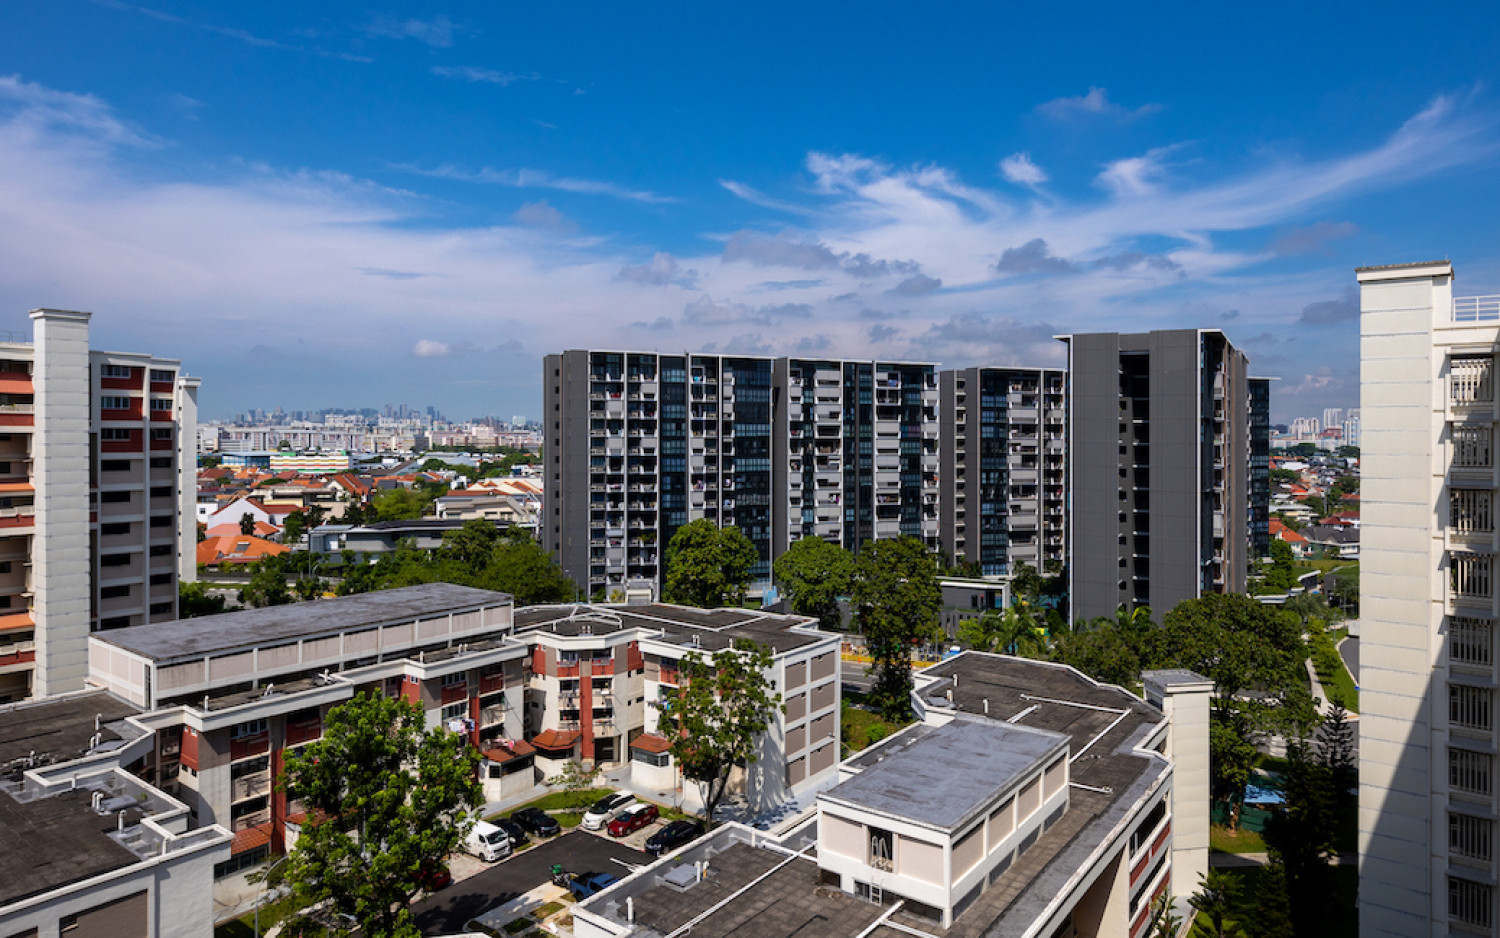 Serangoon saw highest application rate in May BTO launch - Property News